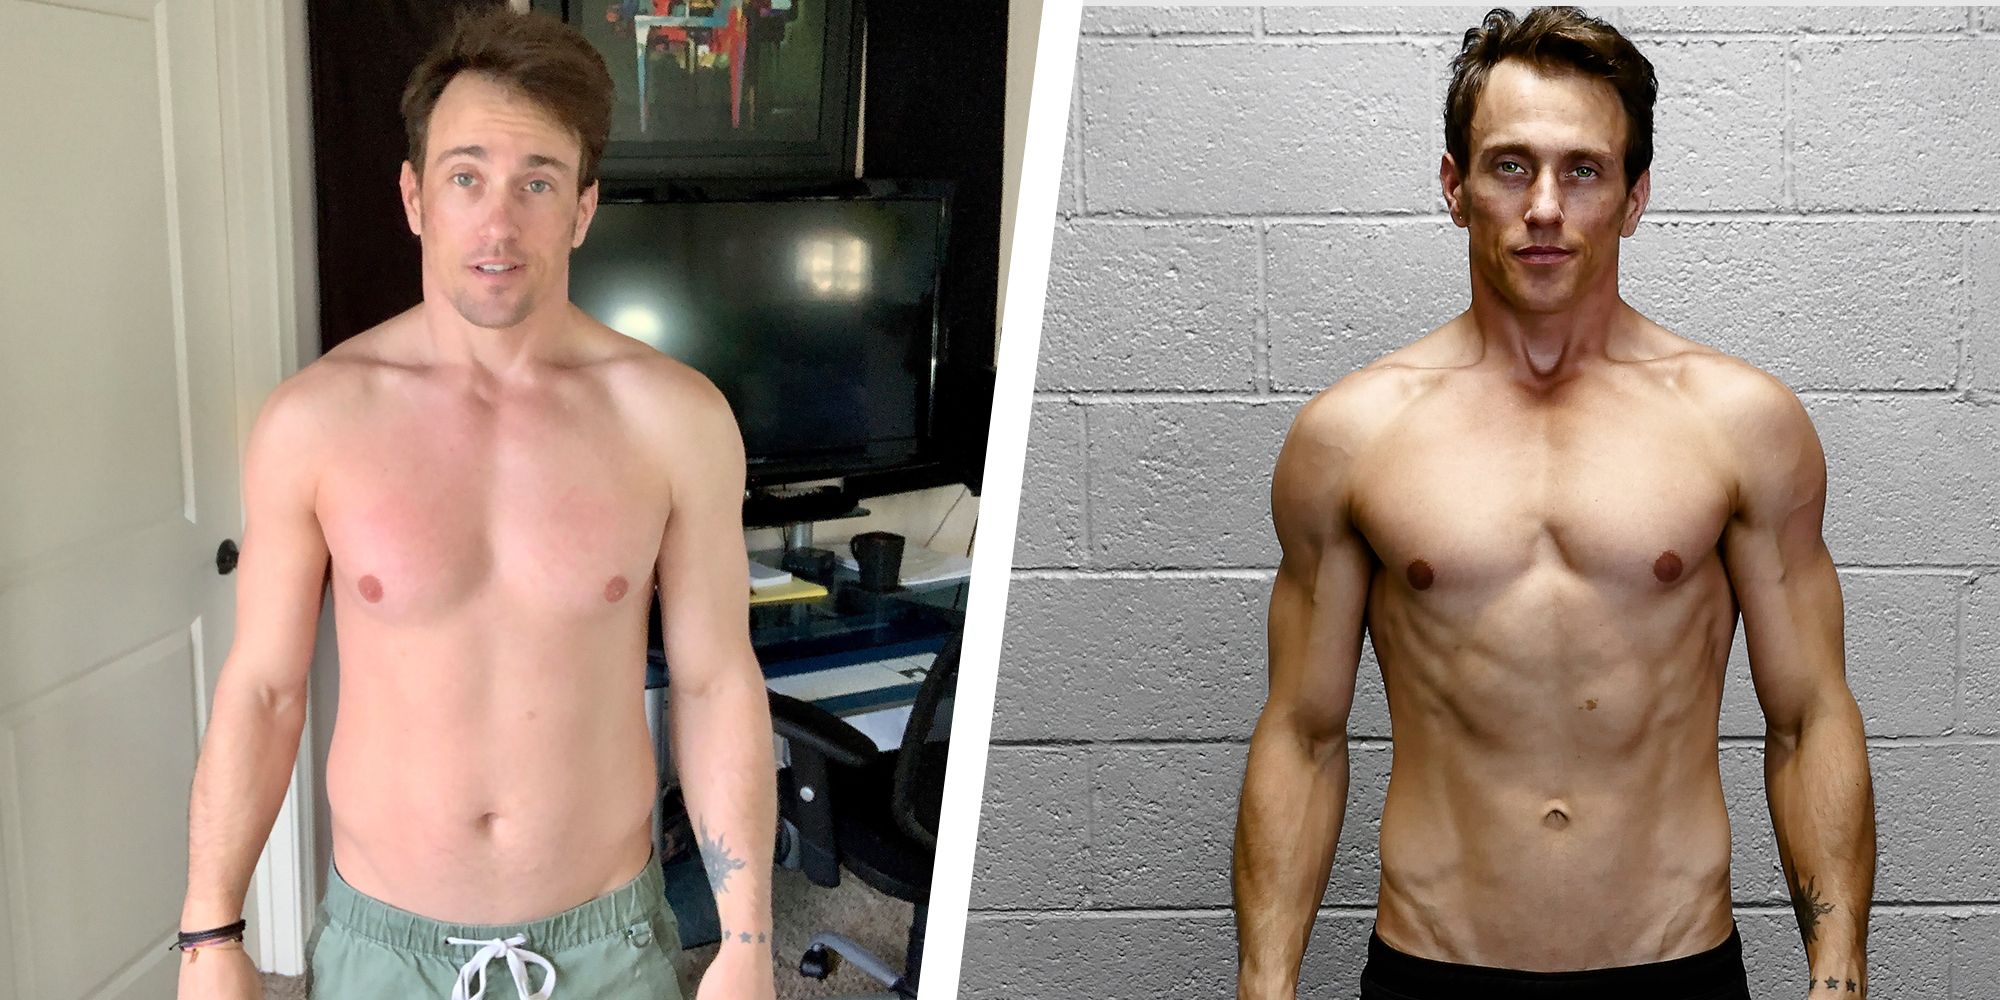 This Simple Plan Helped Me Lose 26 Pounds and Get Ripped